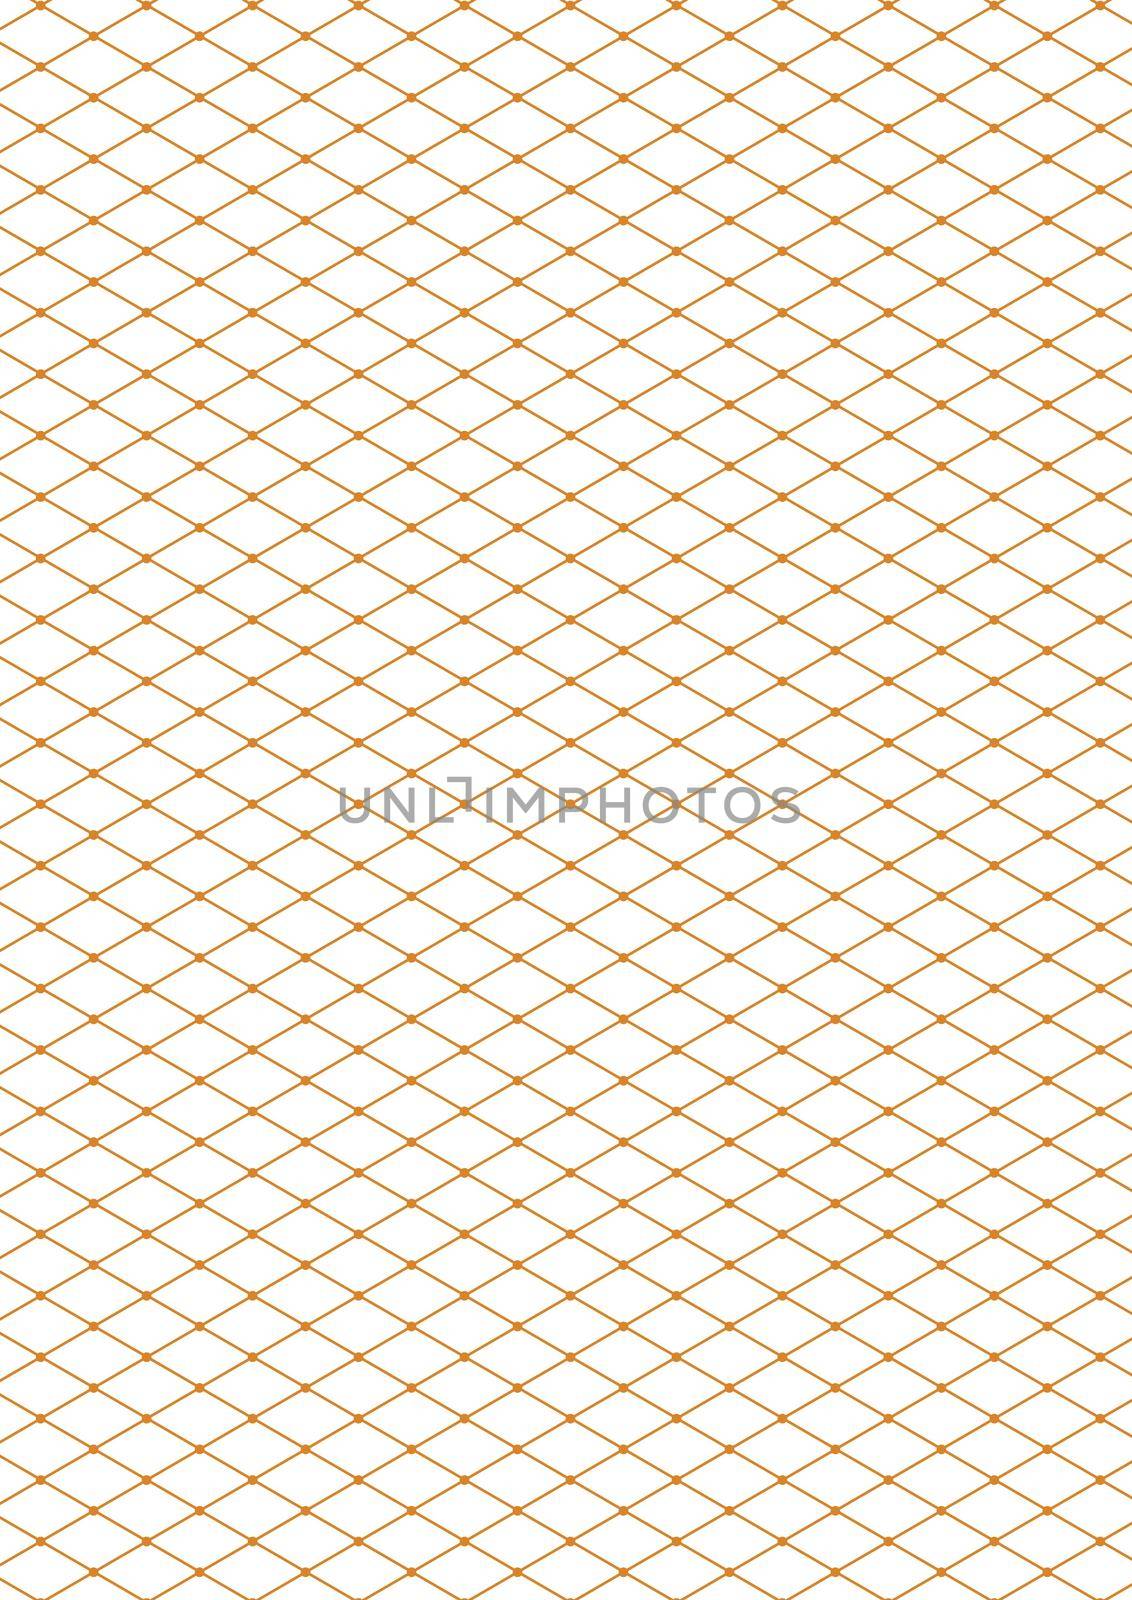 Graph paper. Printable isometric color grid paper with color lines. Geometric background for school, textures, notebook, diary, notes, print, books. Realistic lined paper blank size A4.